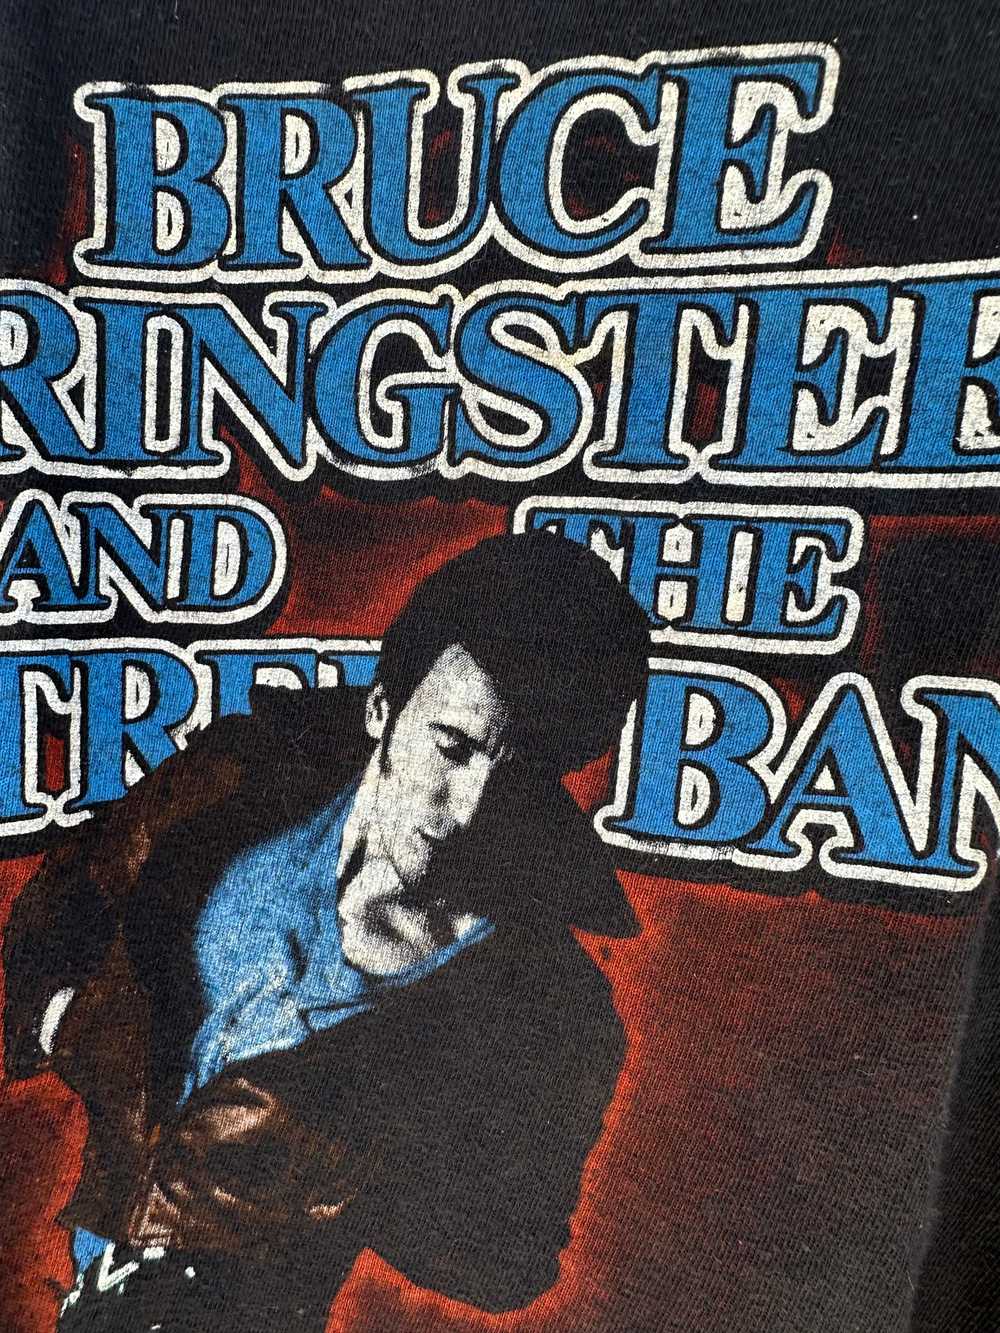 Jump! 1984 Bruce Springsteen '84-'85 Tour Tee - image 2